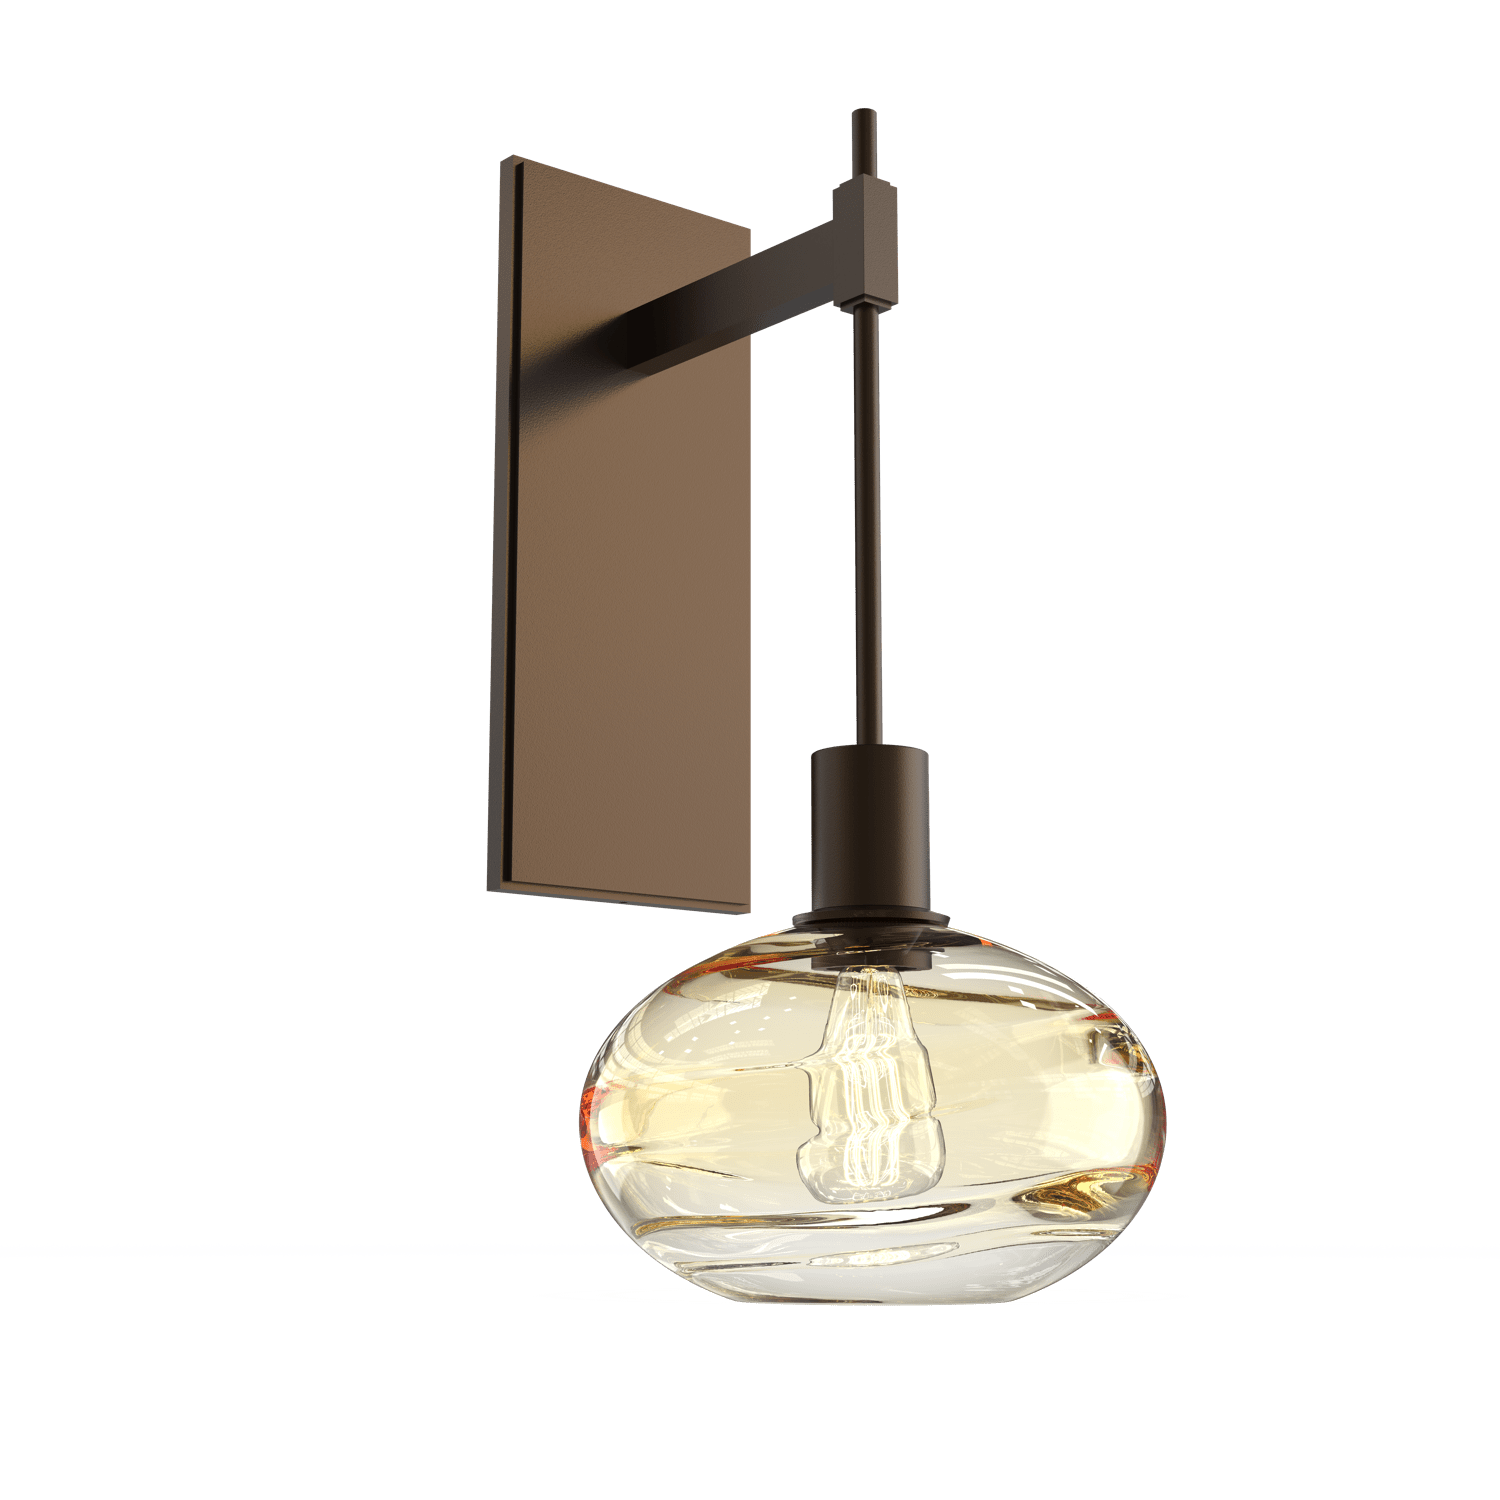 IDB0036-18-FB-OA-Hammerton-Studio-Optic-Blown-Glass-Coppa-tempo-wall-sconce-with-flat-bronze-finish-and-optic-amber-blown-glass-shades-and-incandescent-lamping